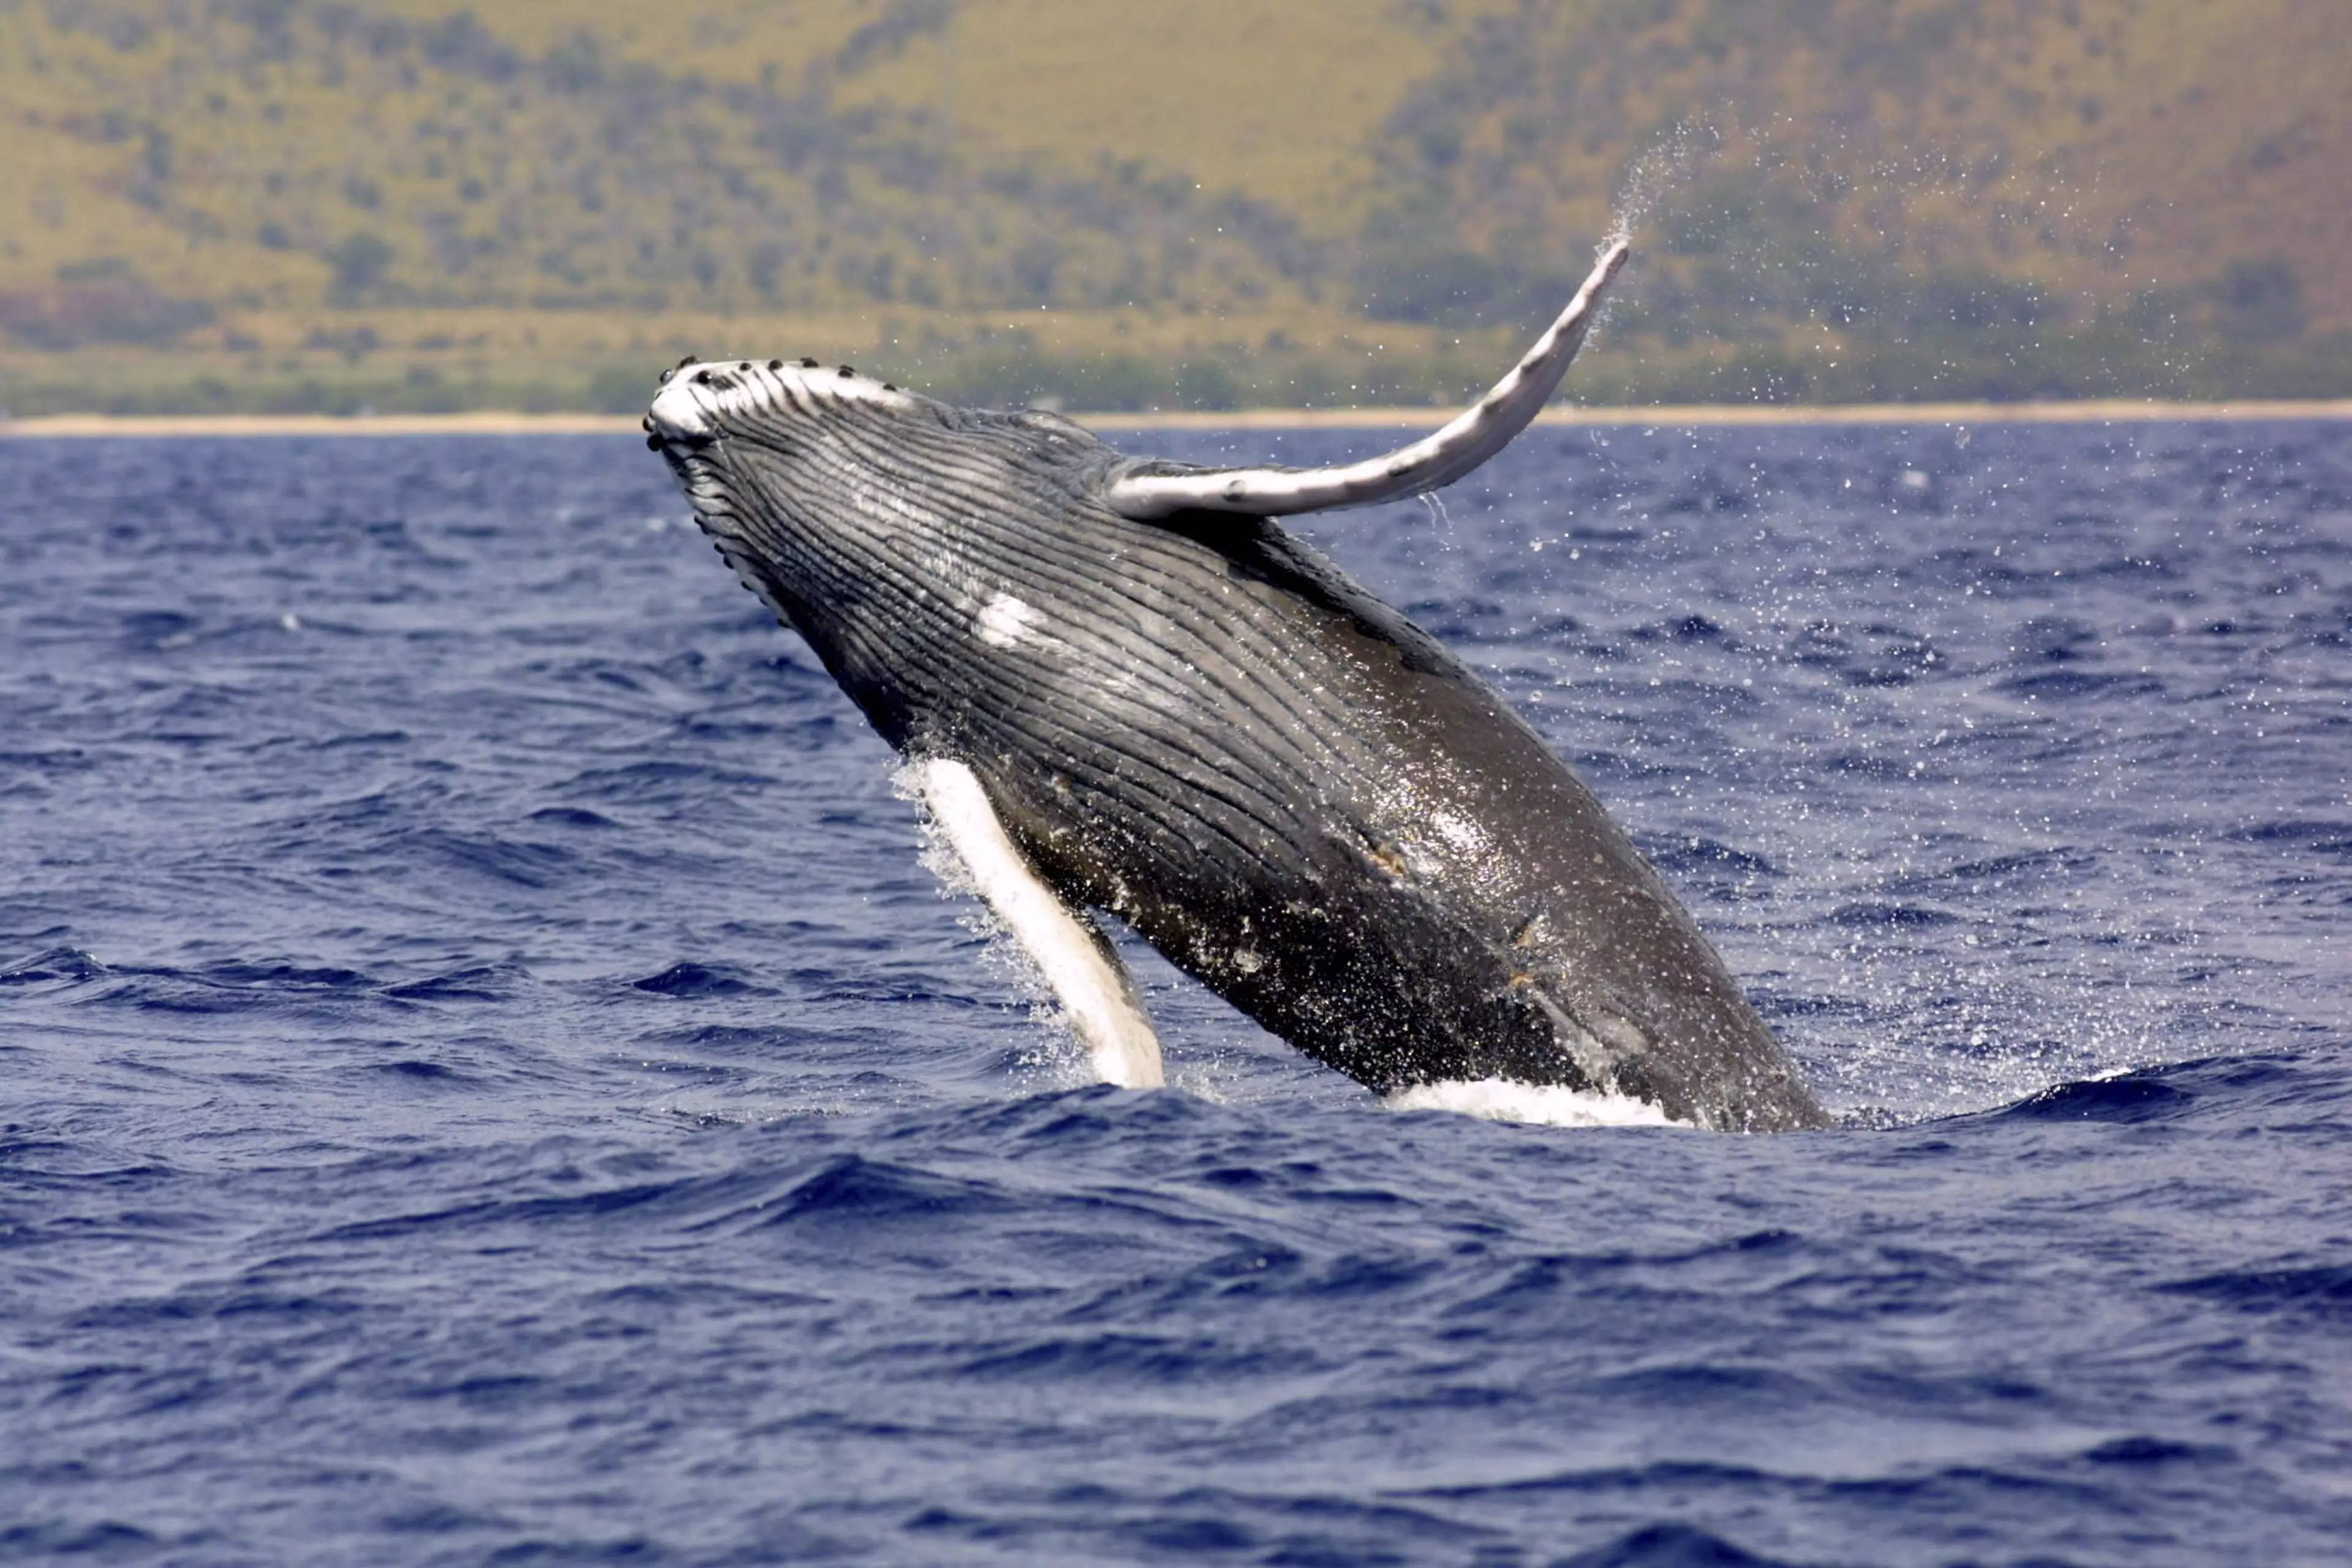 Stock image of humpback whale.